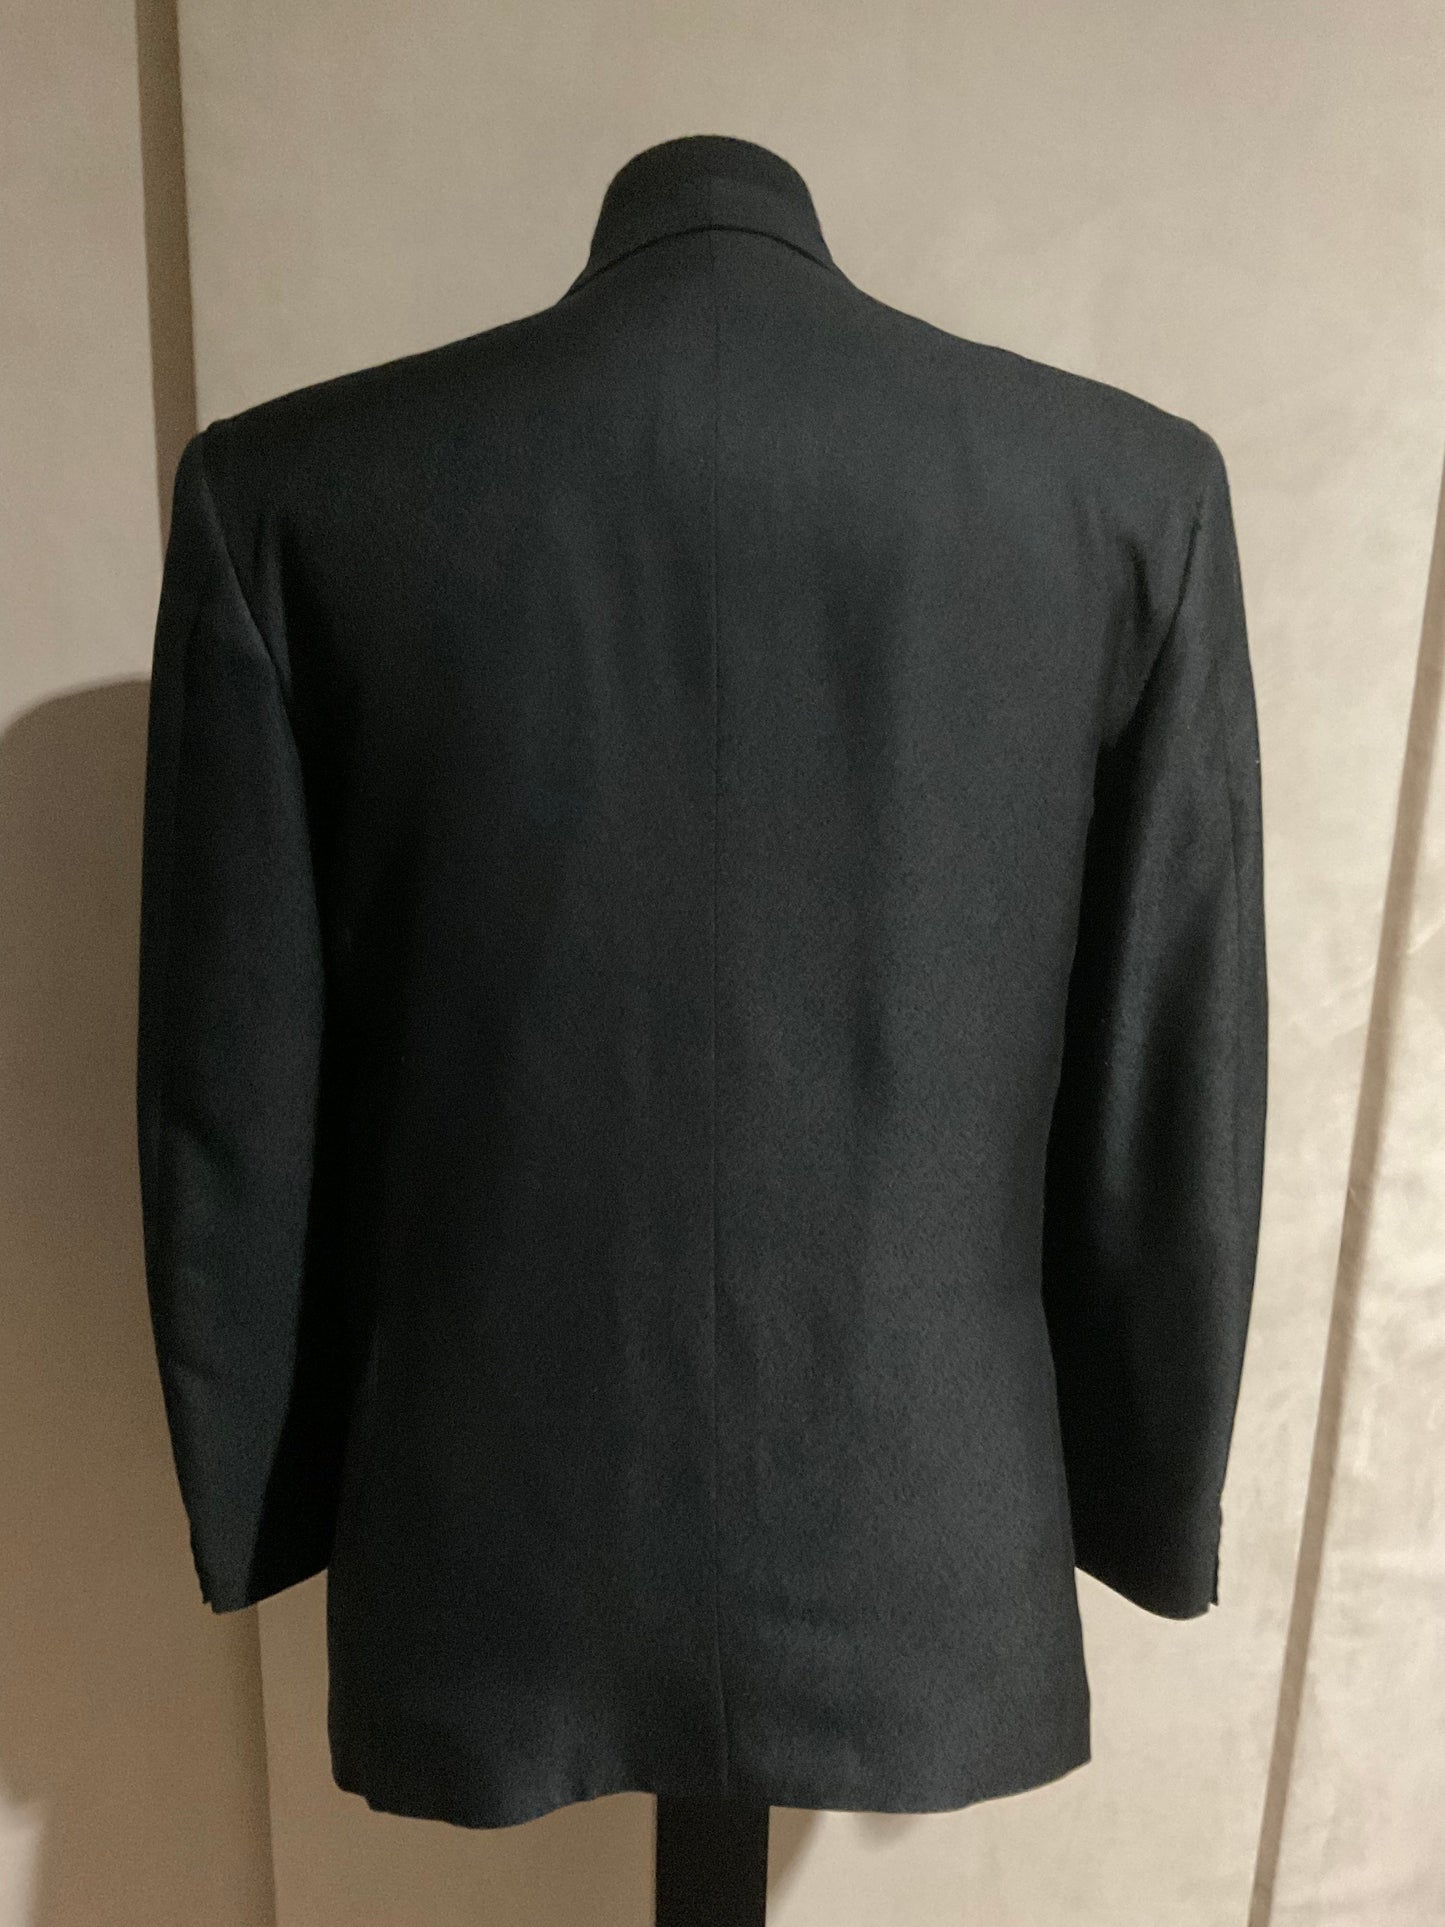 R P TUXEDO FORMAL DINNER JACKET / BLACK SILK / DOUBLE BREASTED / 40 REG / MADE IN ITALY